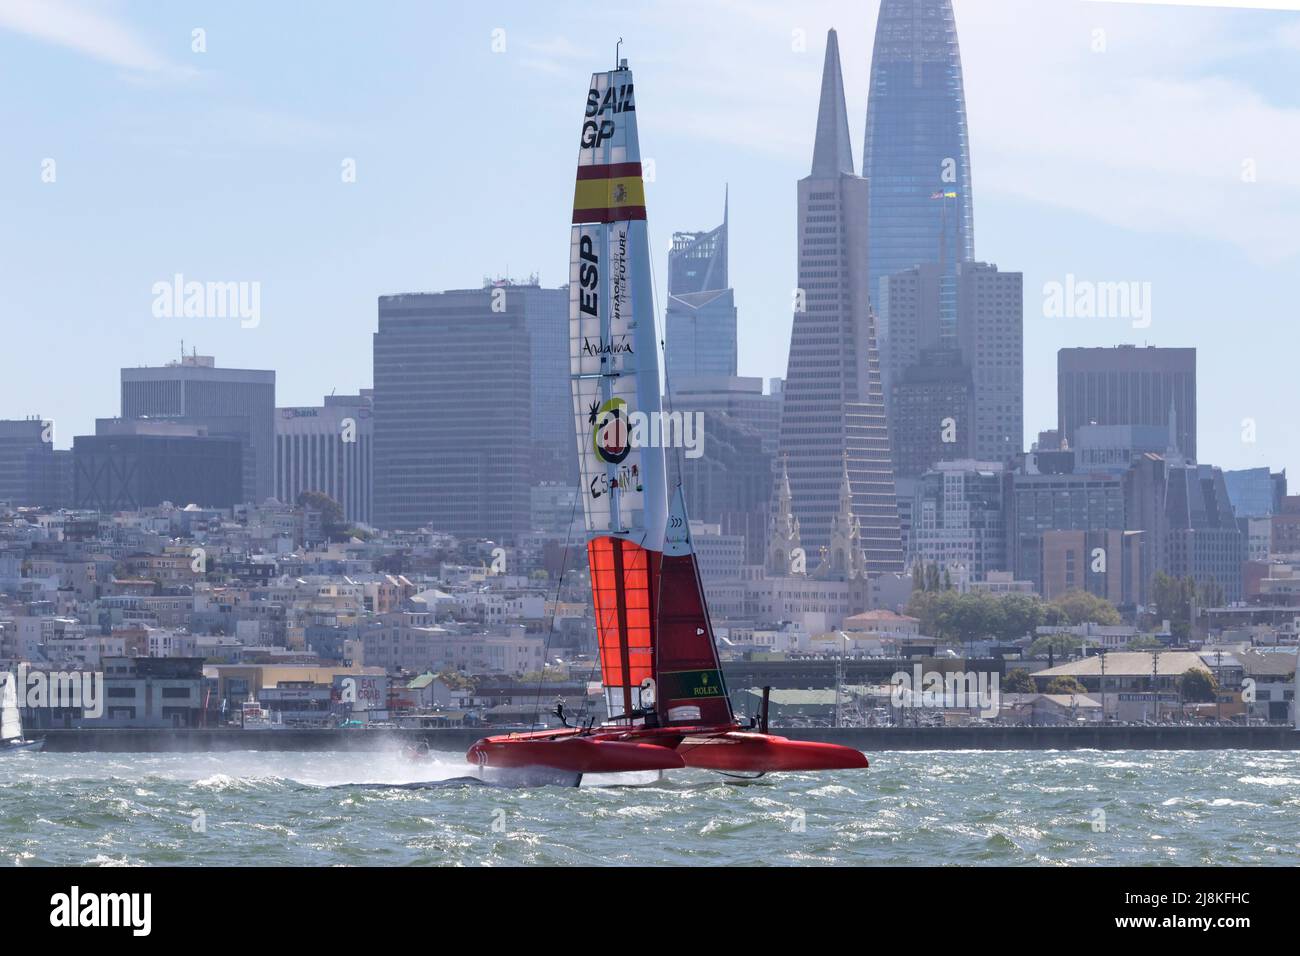 Team Espana races their F50 catamaran on the waters of San Francisco Bay during the 2022 SailGP races. Stock Photo